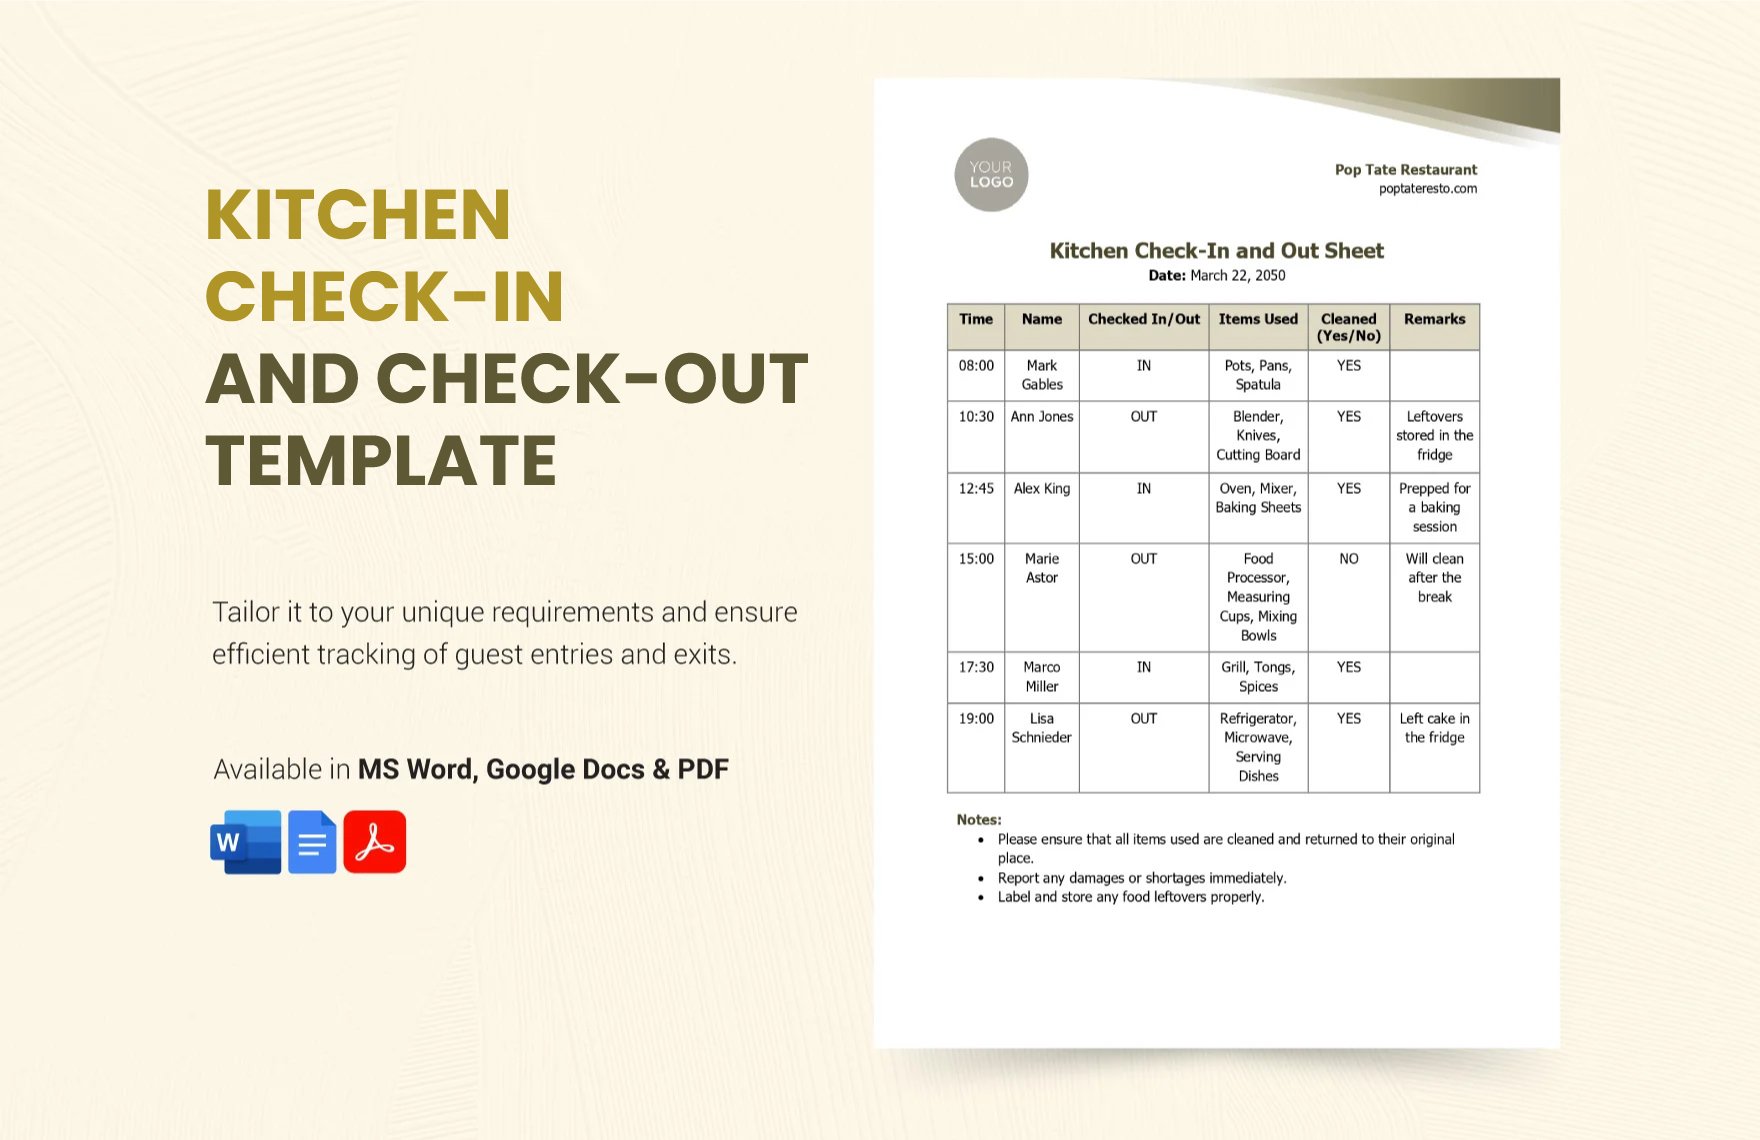 Kitchen Check-in and Out Template